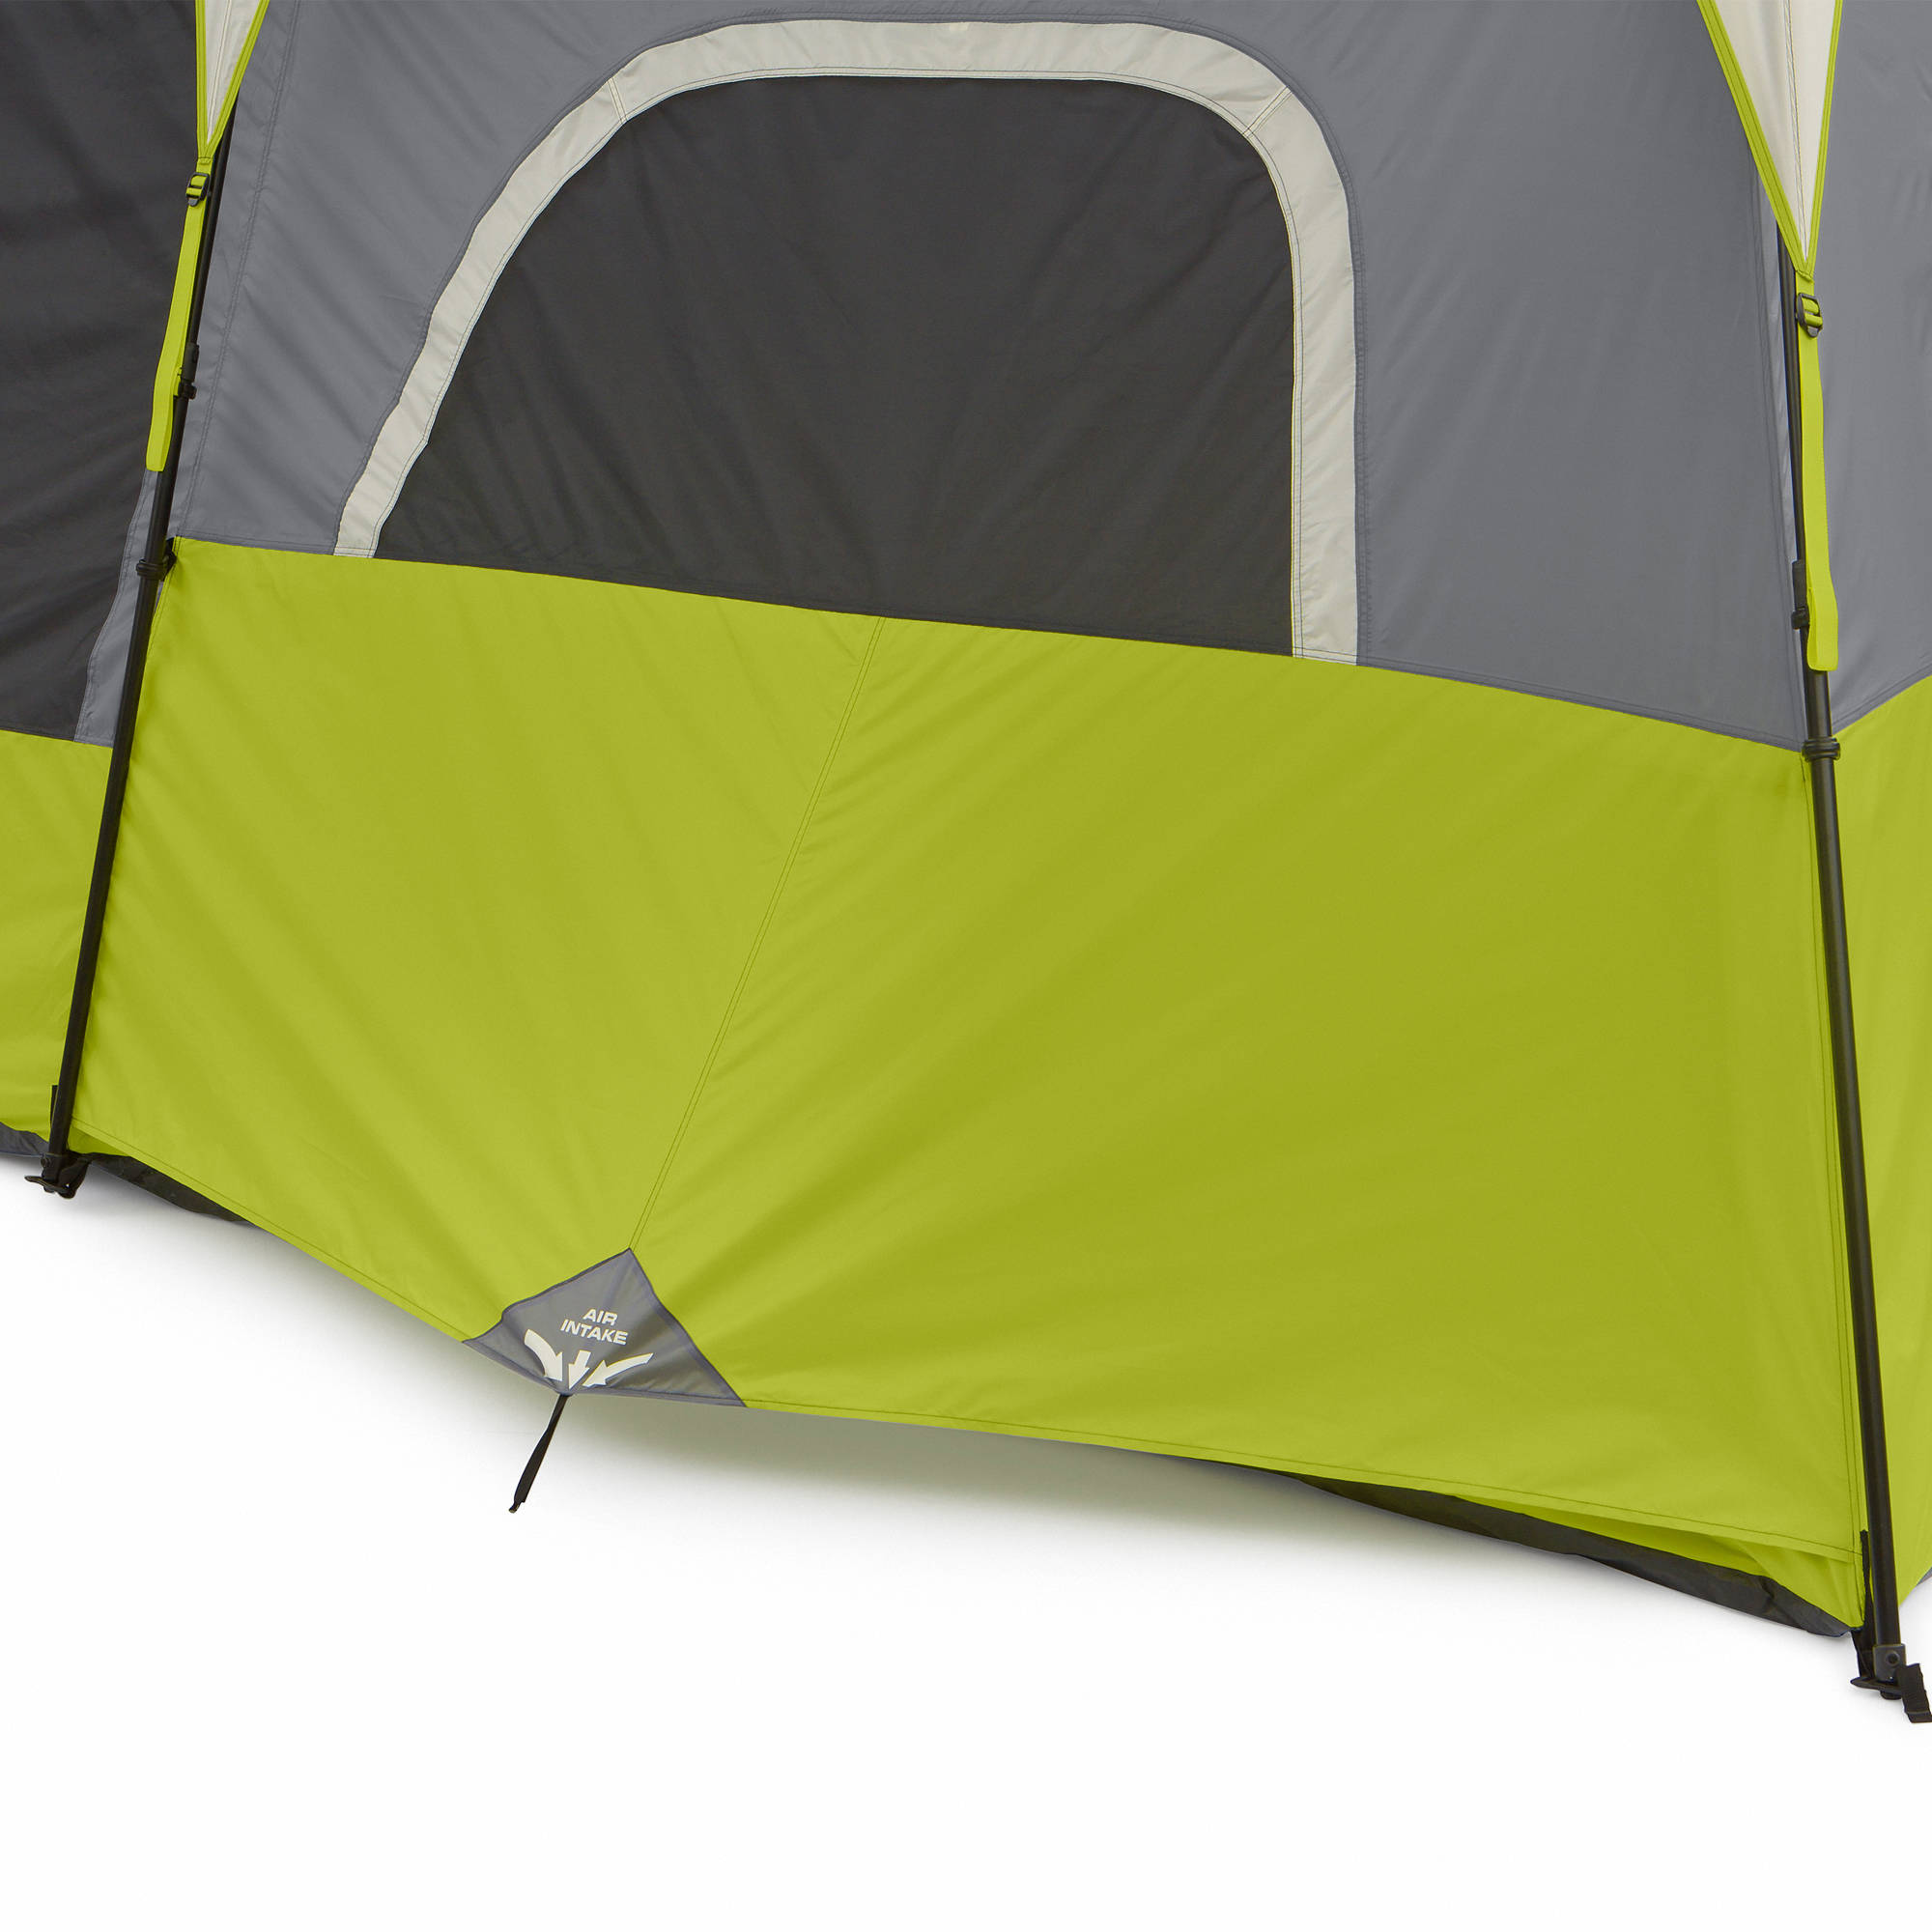 Core 9 Person Instant Cabin Tent - 14' x 9' - image 4 of 10